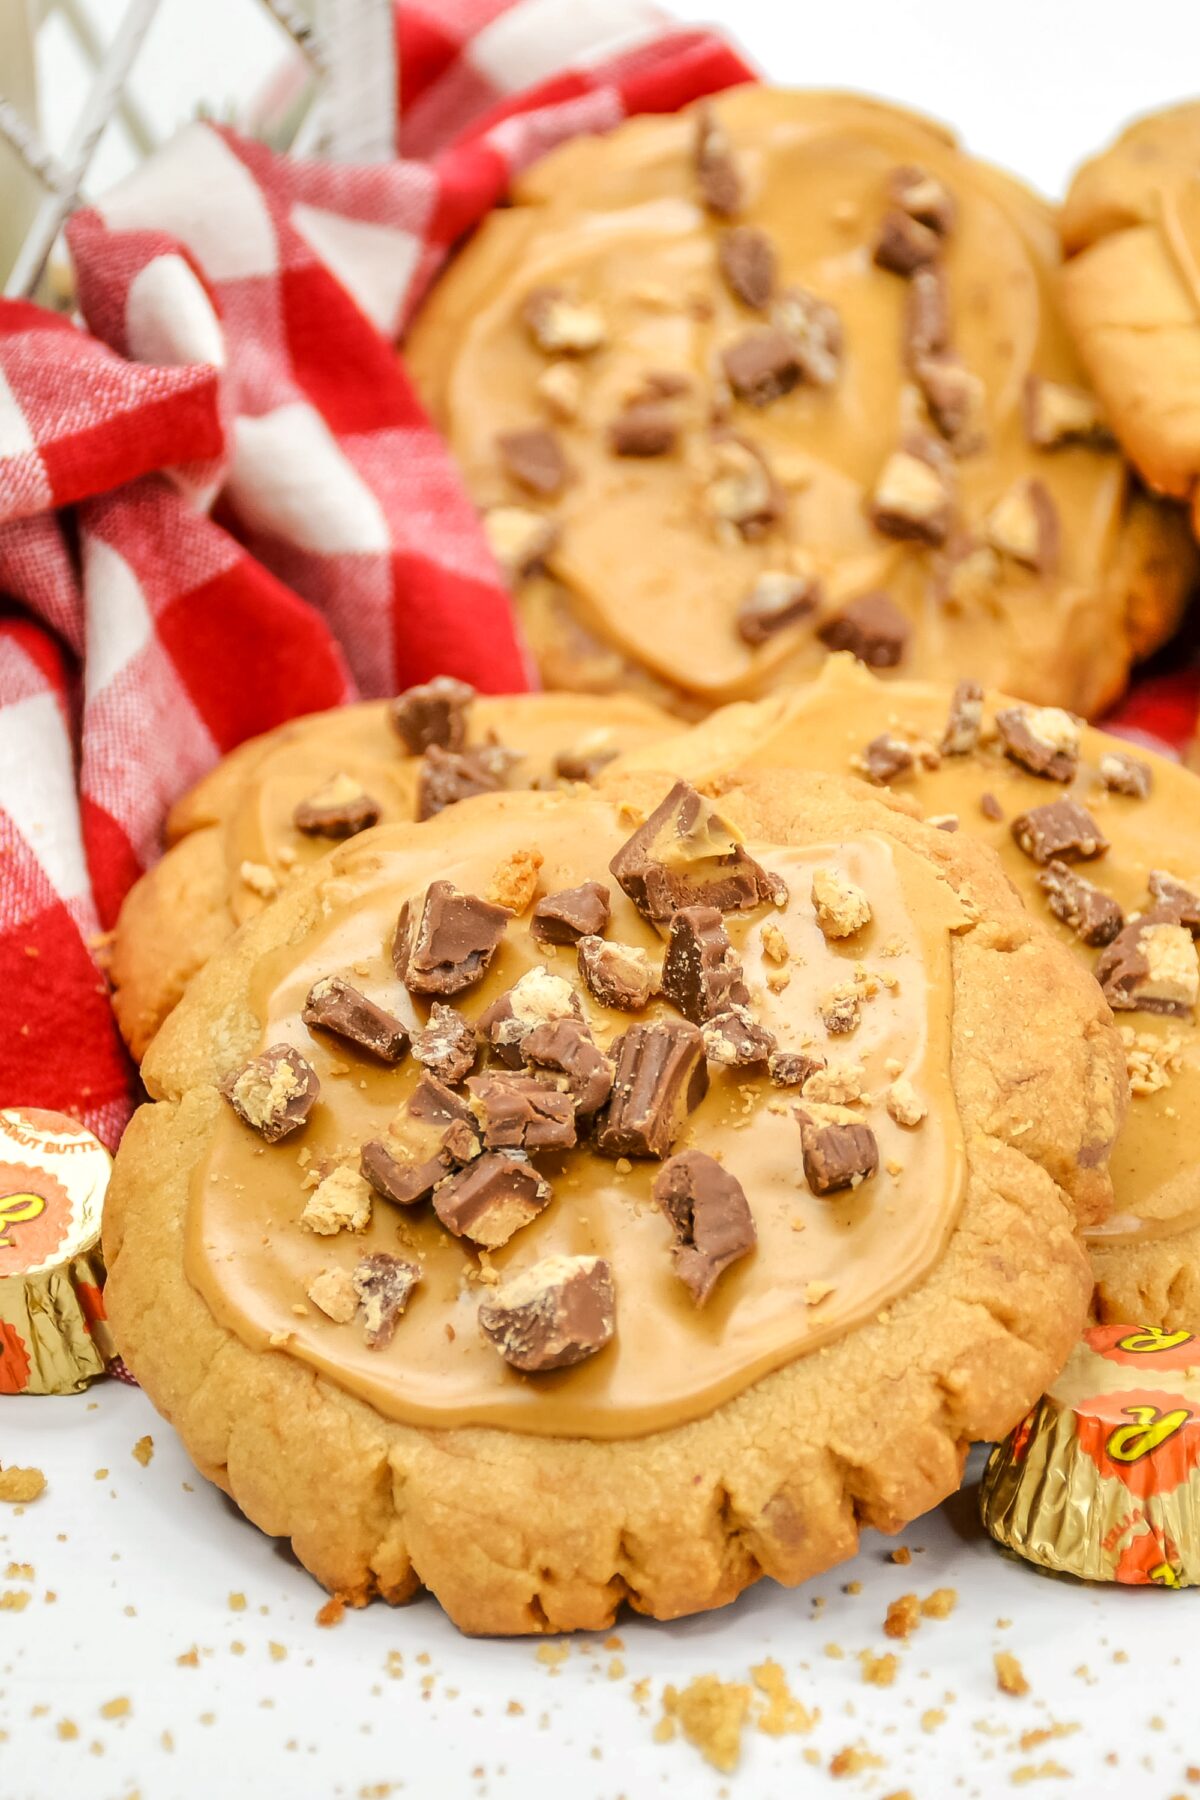 Learn how to make the most delicious peanut butter cookies ever with this copycat recipe for crumbl Reese's peanut butter cup cookies.